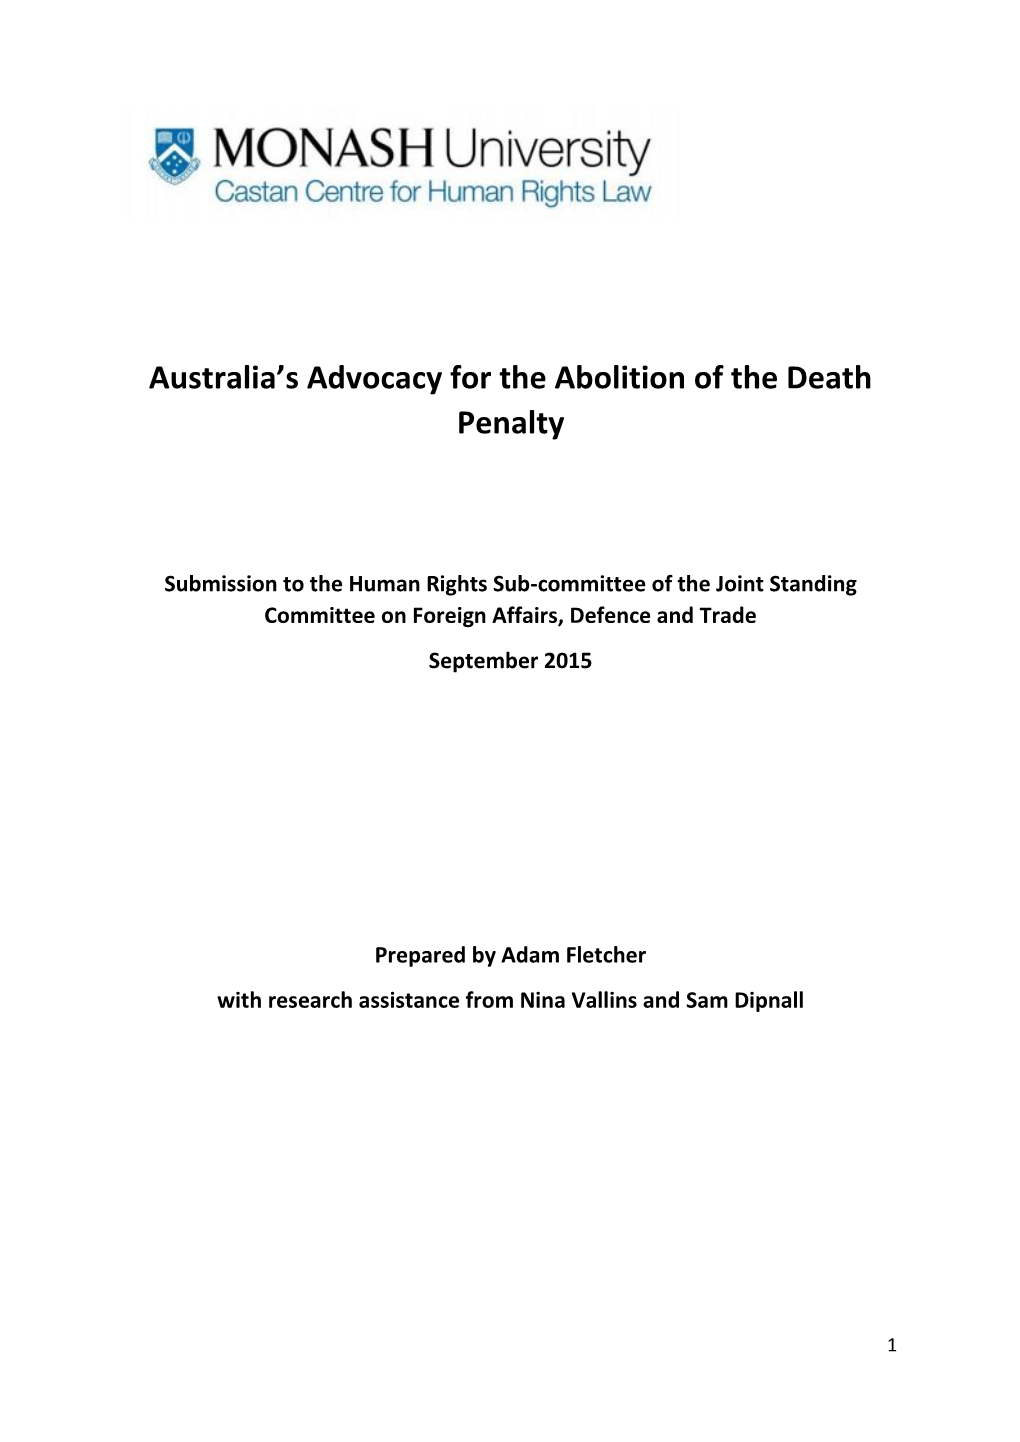 Australia's Advocacy for the Abolition of the Death Penalty